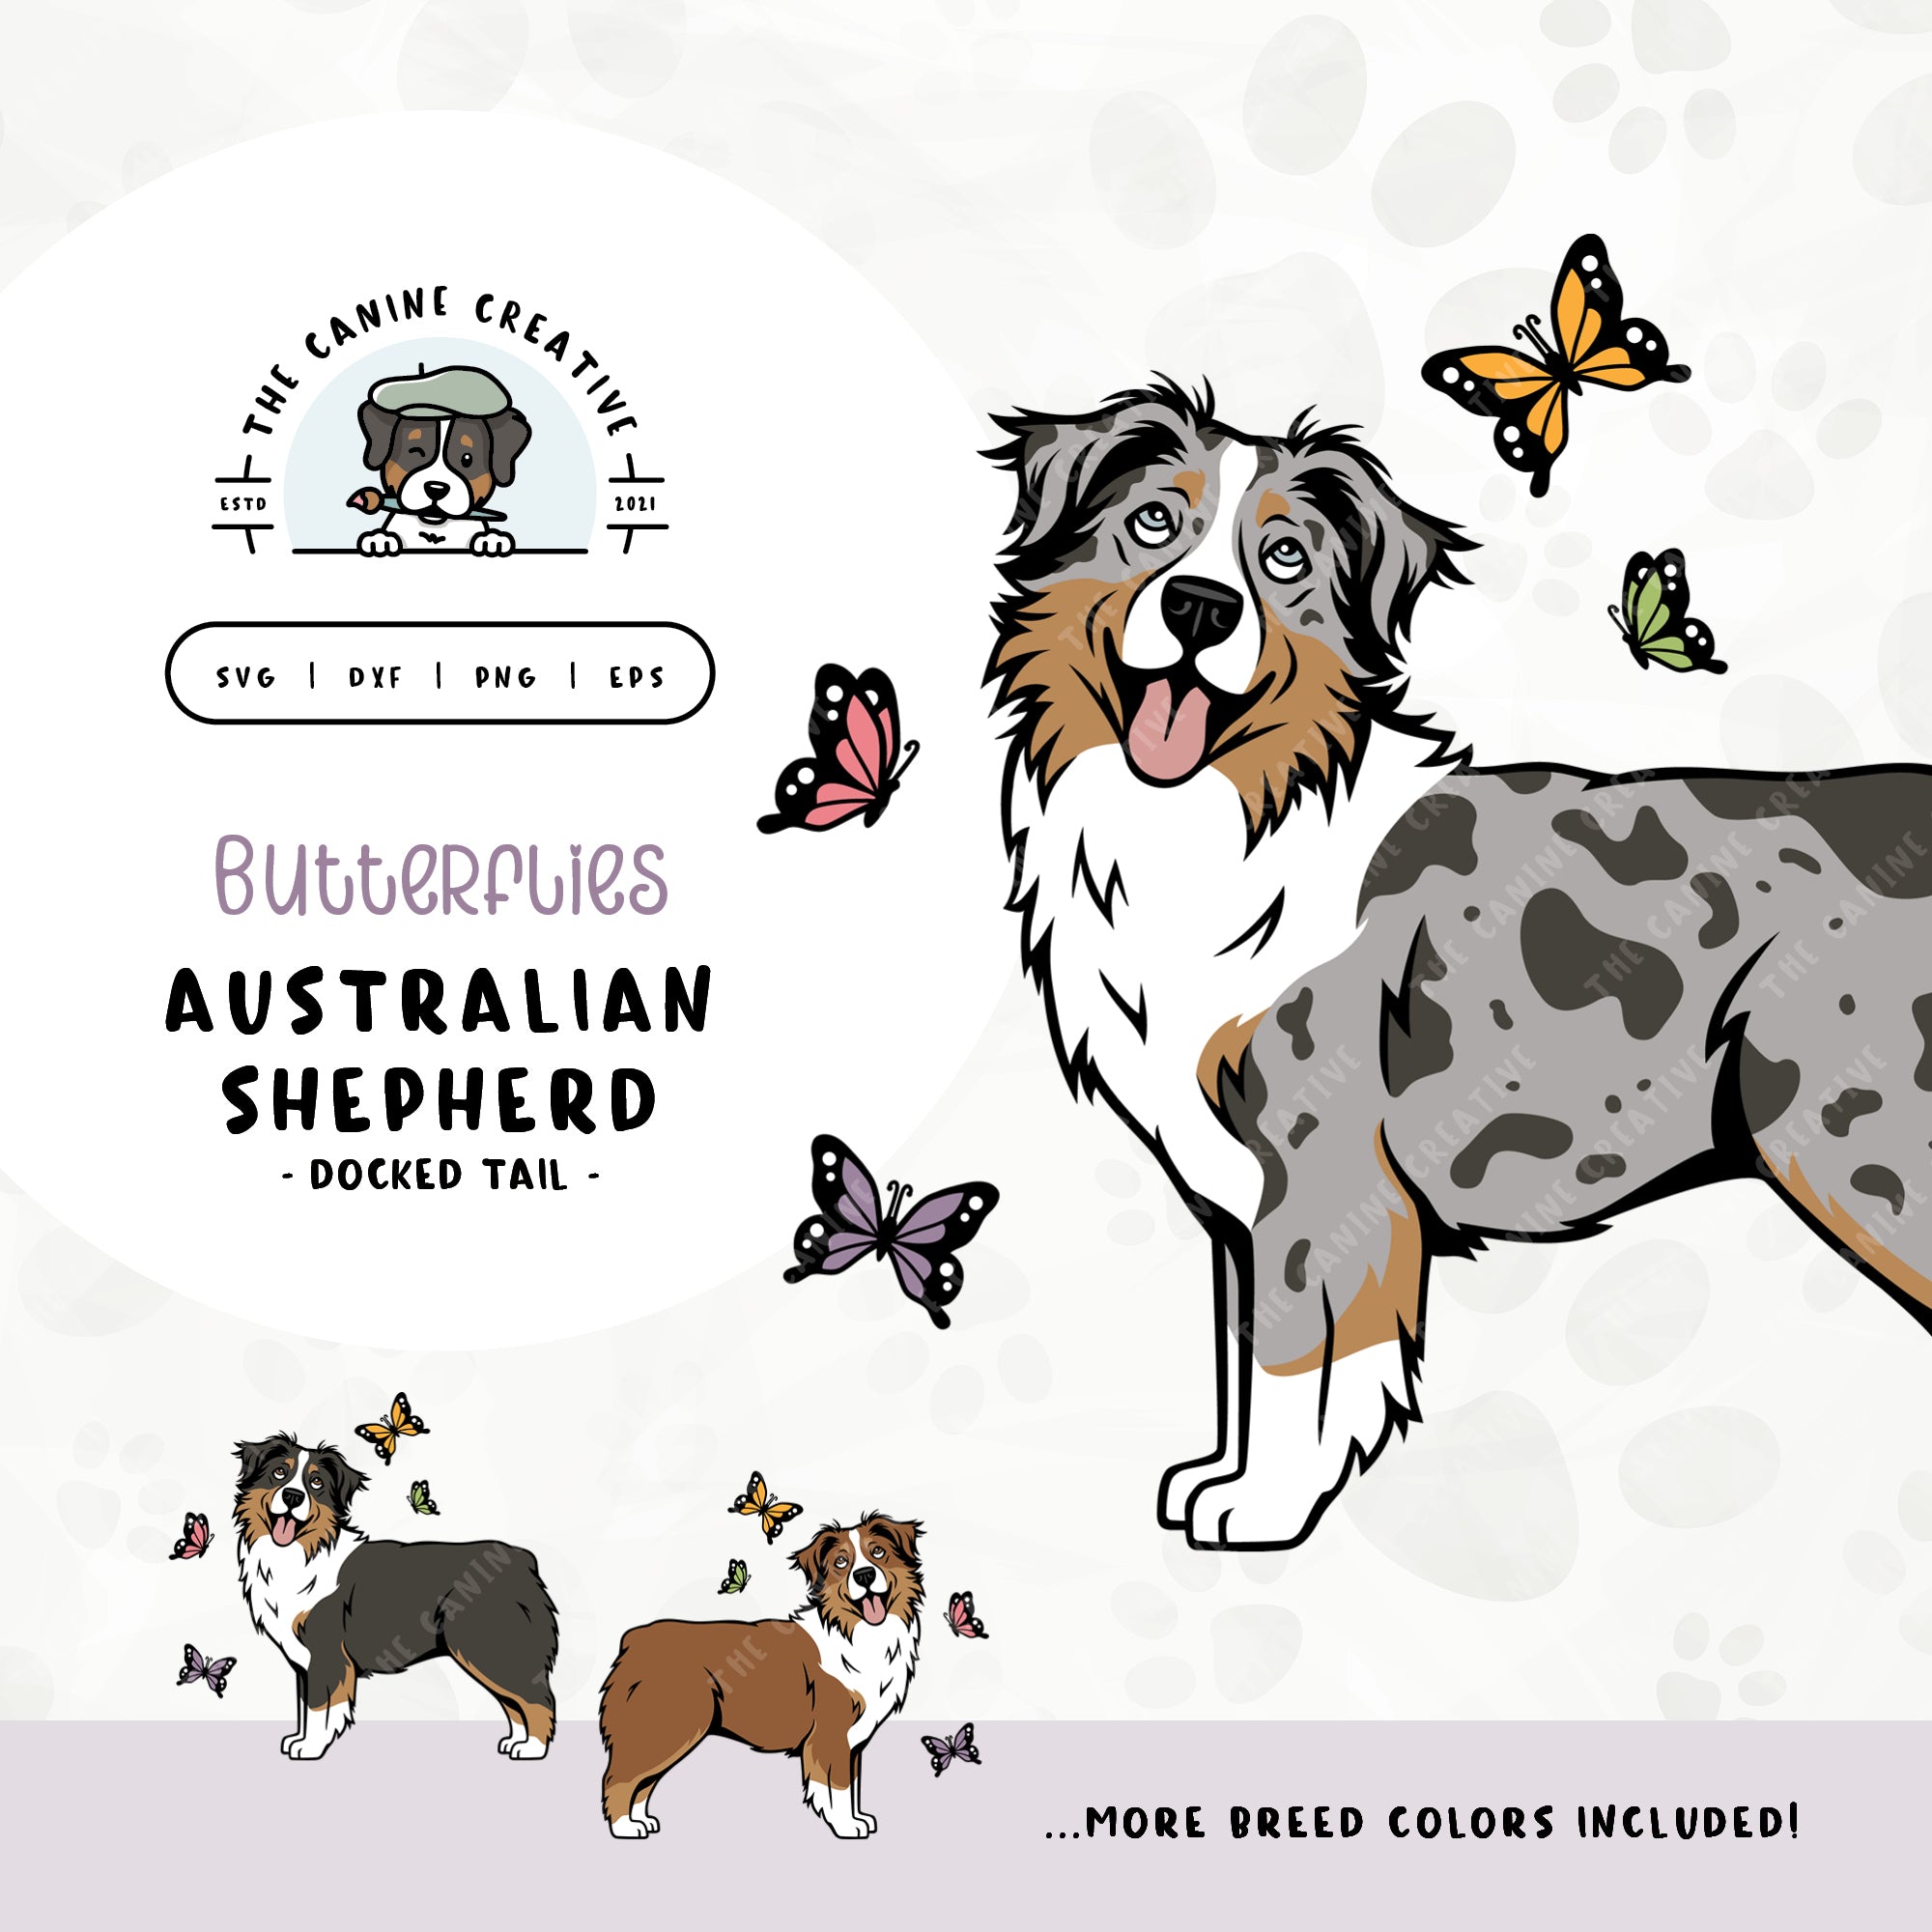 This springtime illustration features a docked tail Australian Shepherd among colorful butterflies. File formats include: SVG, DXF, PNG, and EPS.